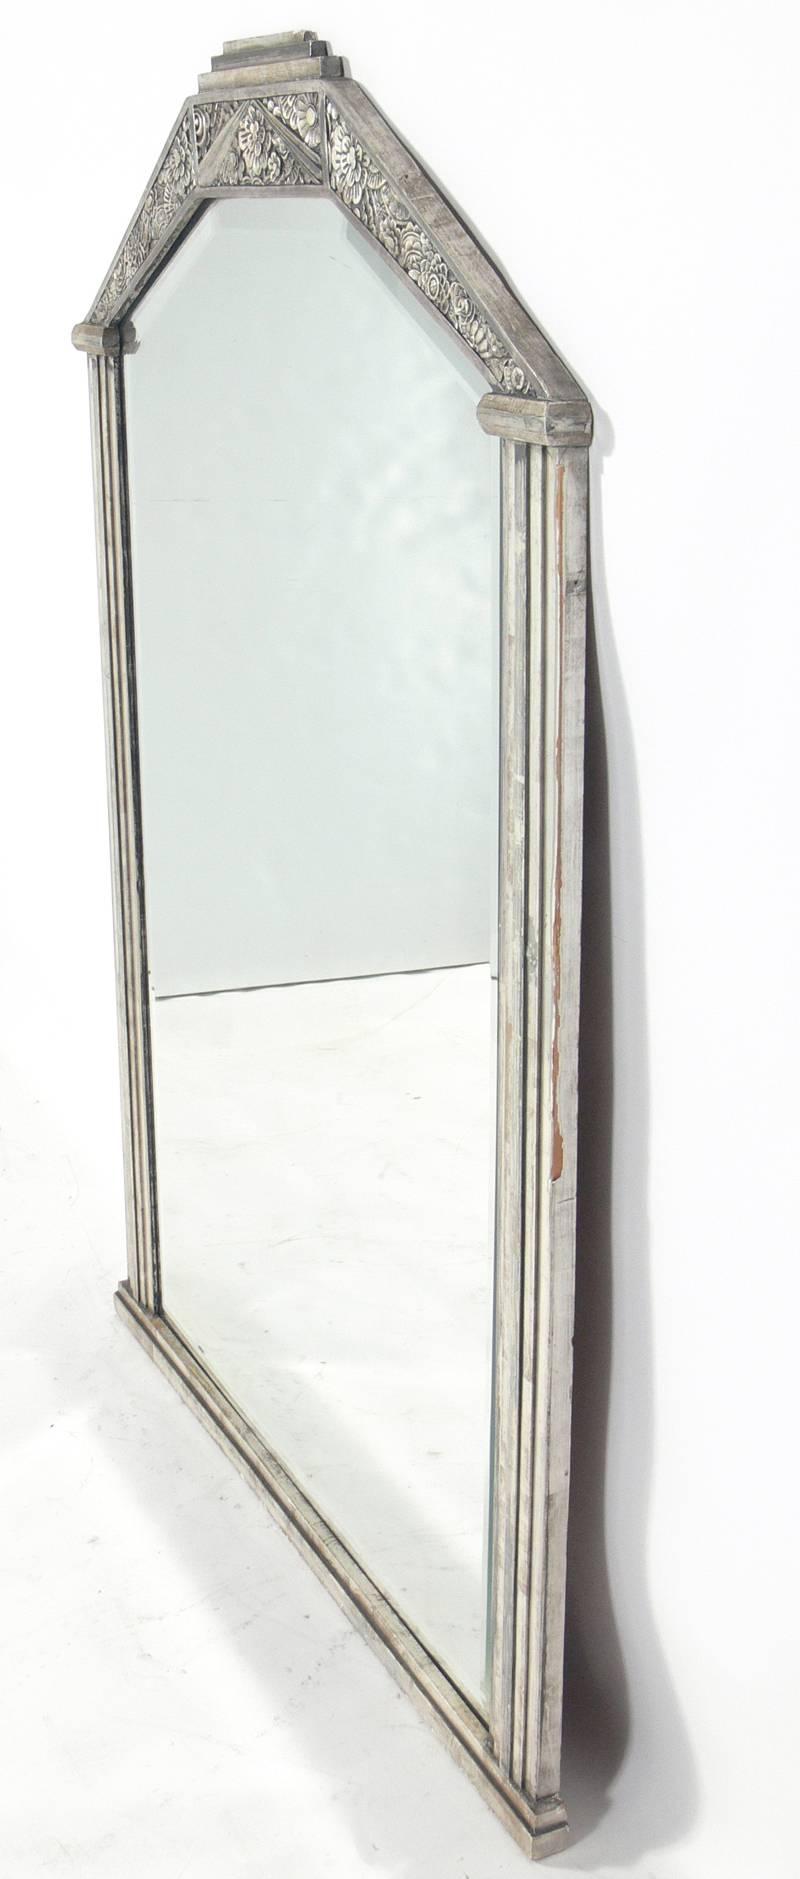 Art Deco silver leaf mirror, French, circa 1930s. Constructed in silver leafed wood and gesso. Retains warm original patina to both the silver leafed frame and the original beveled mirrored glass.